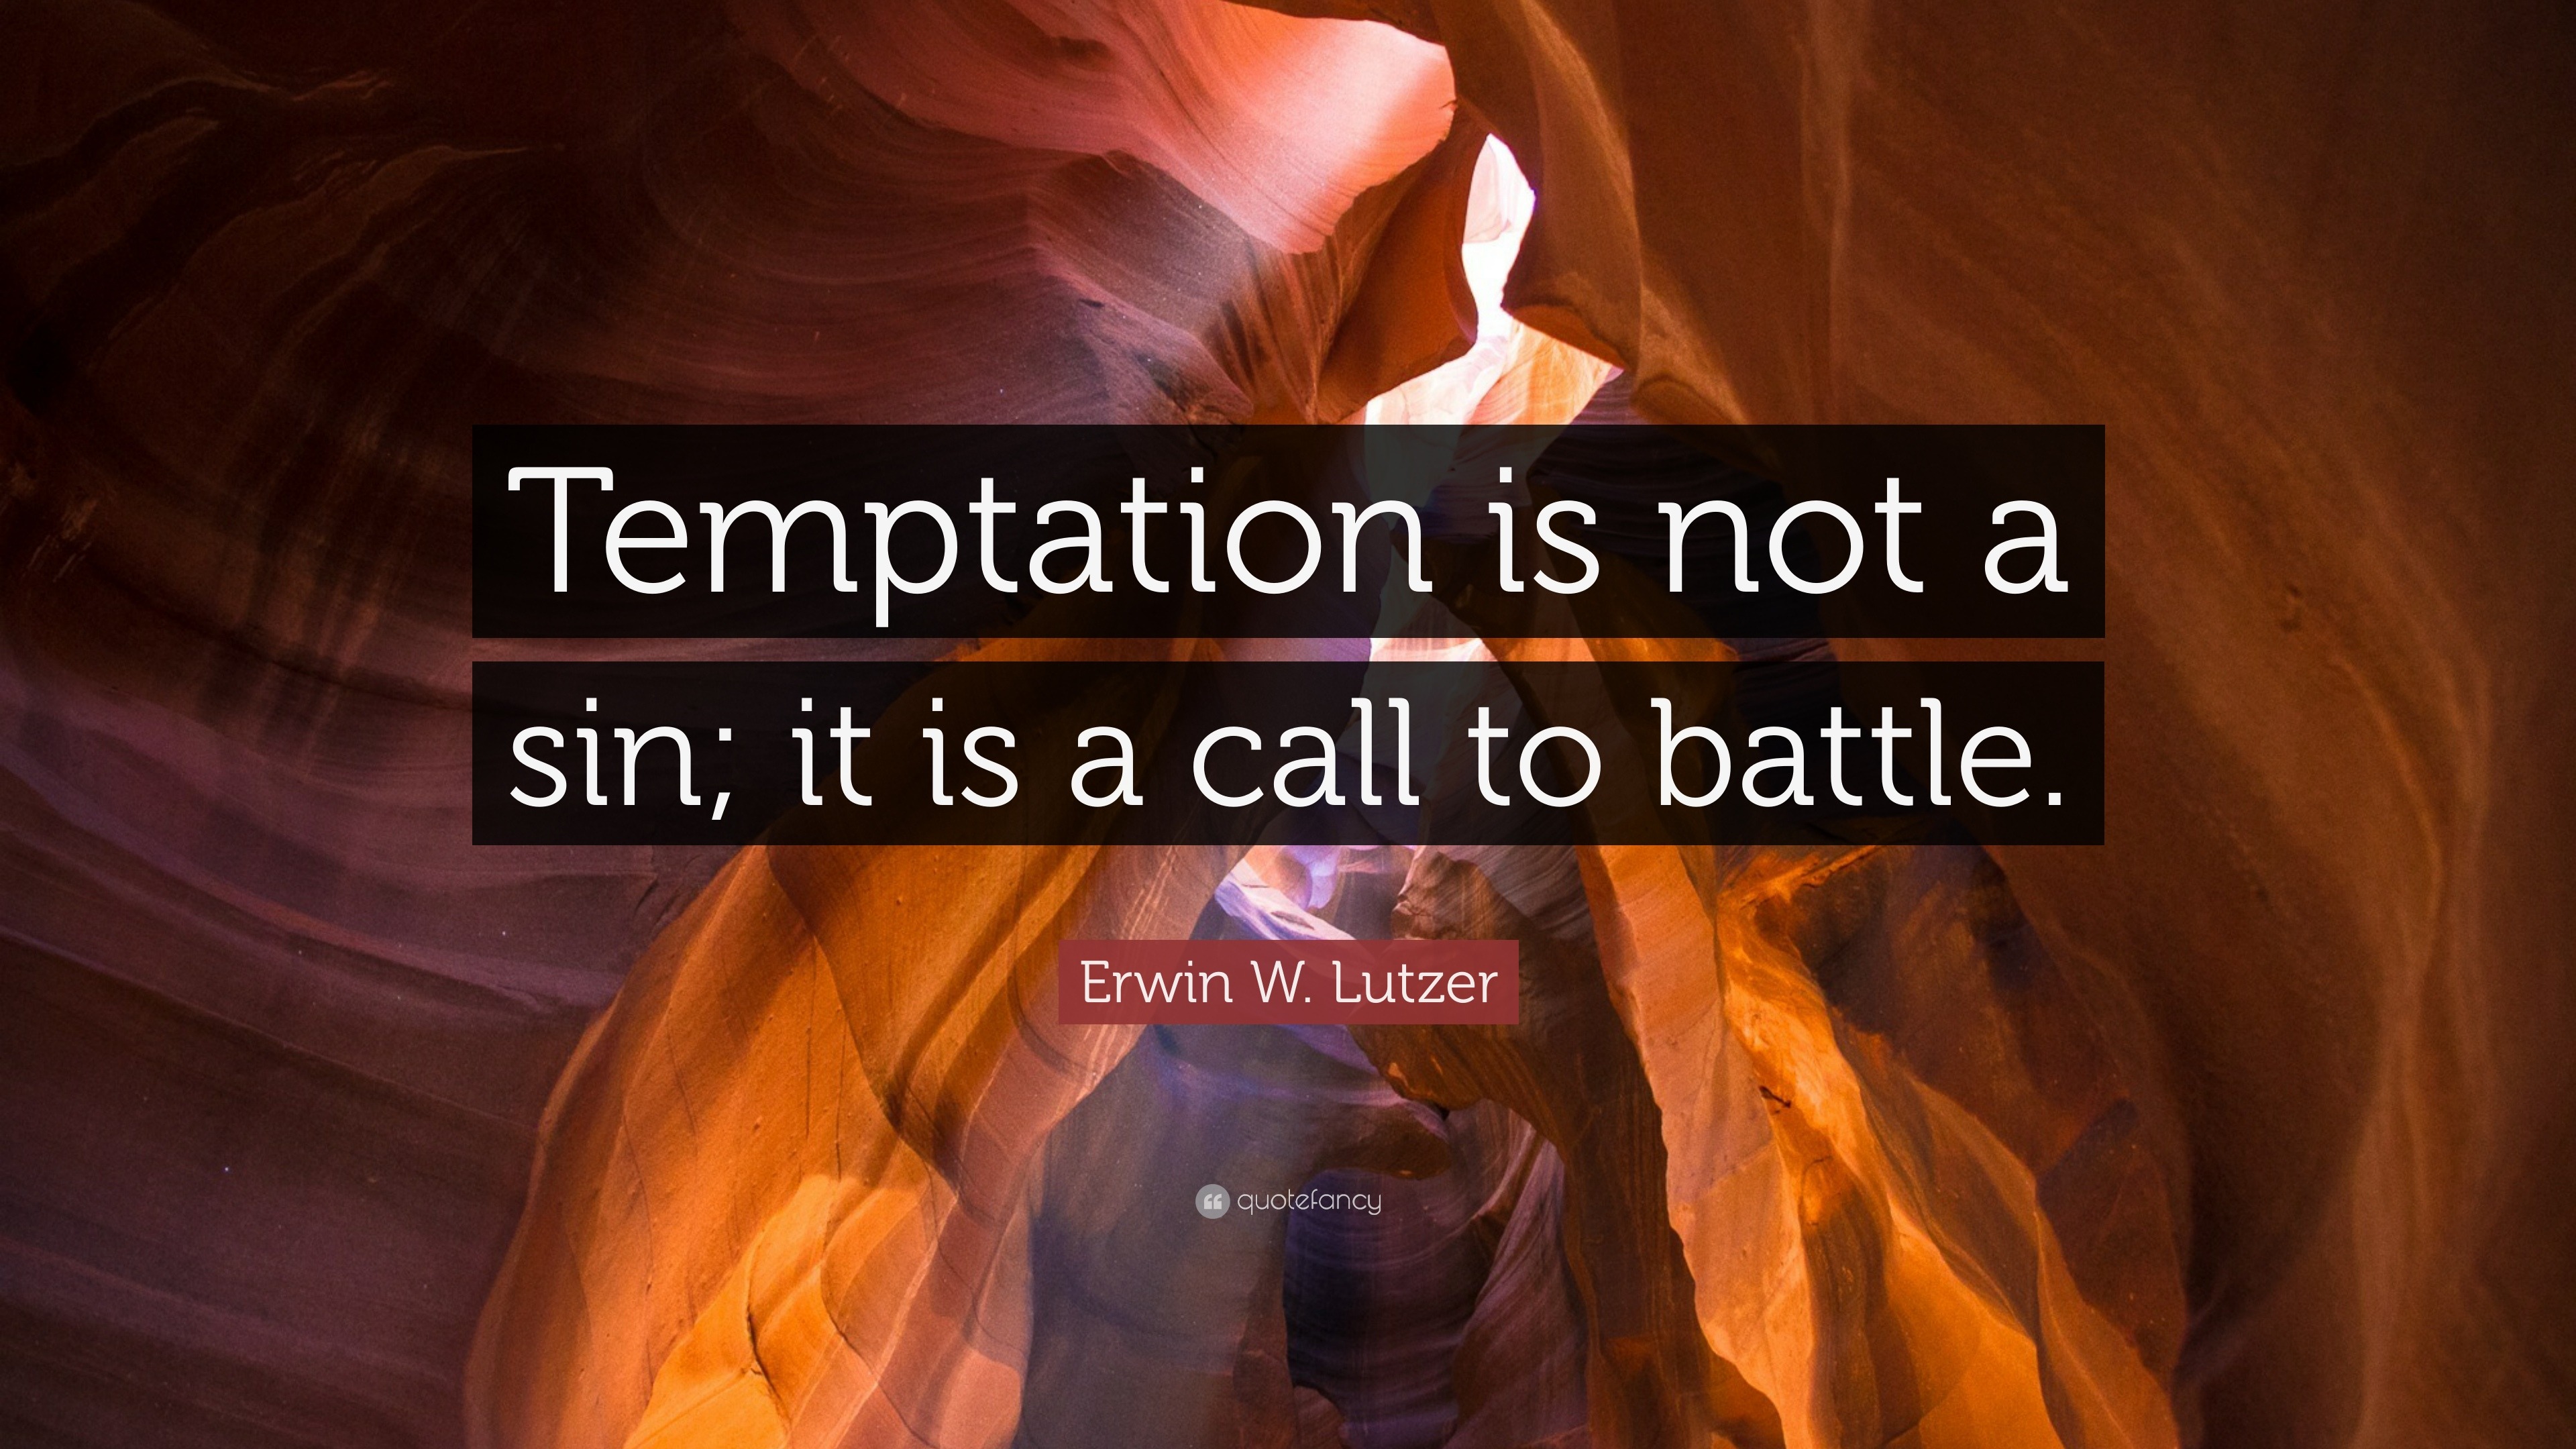 Erwin W. Lutzer Quote: “Temptation is not a sin; it is a call to battle.”